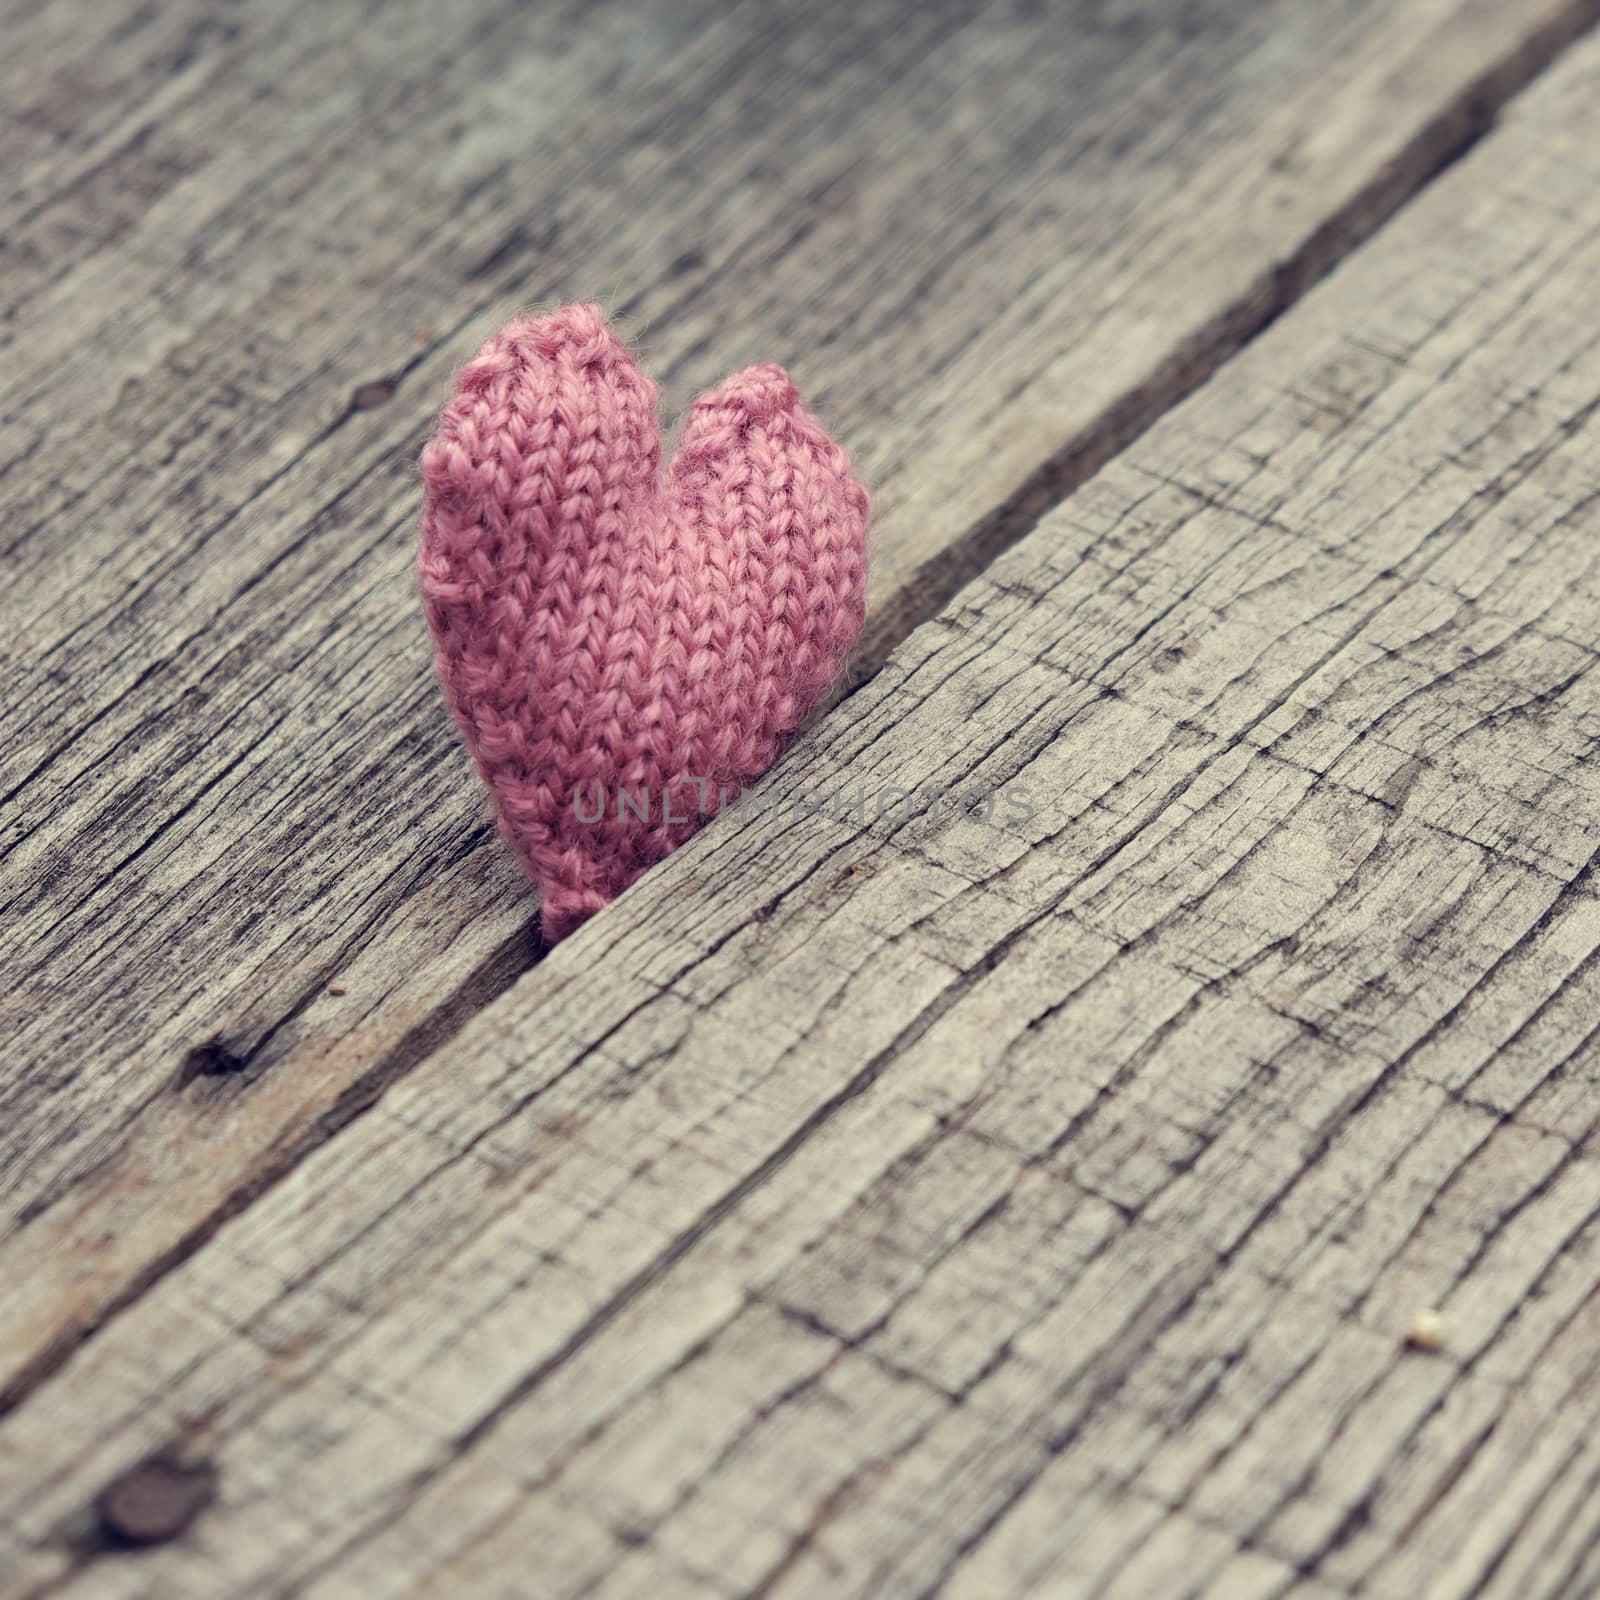 Lonely heart on wooden background by xuanhuongho